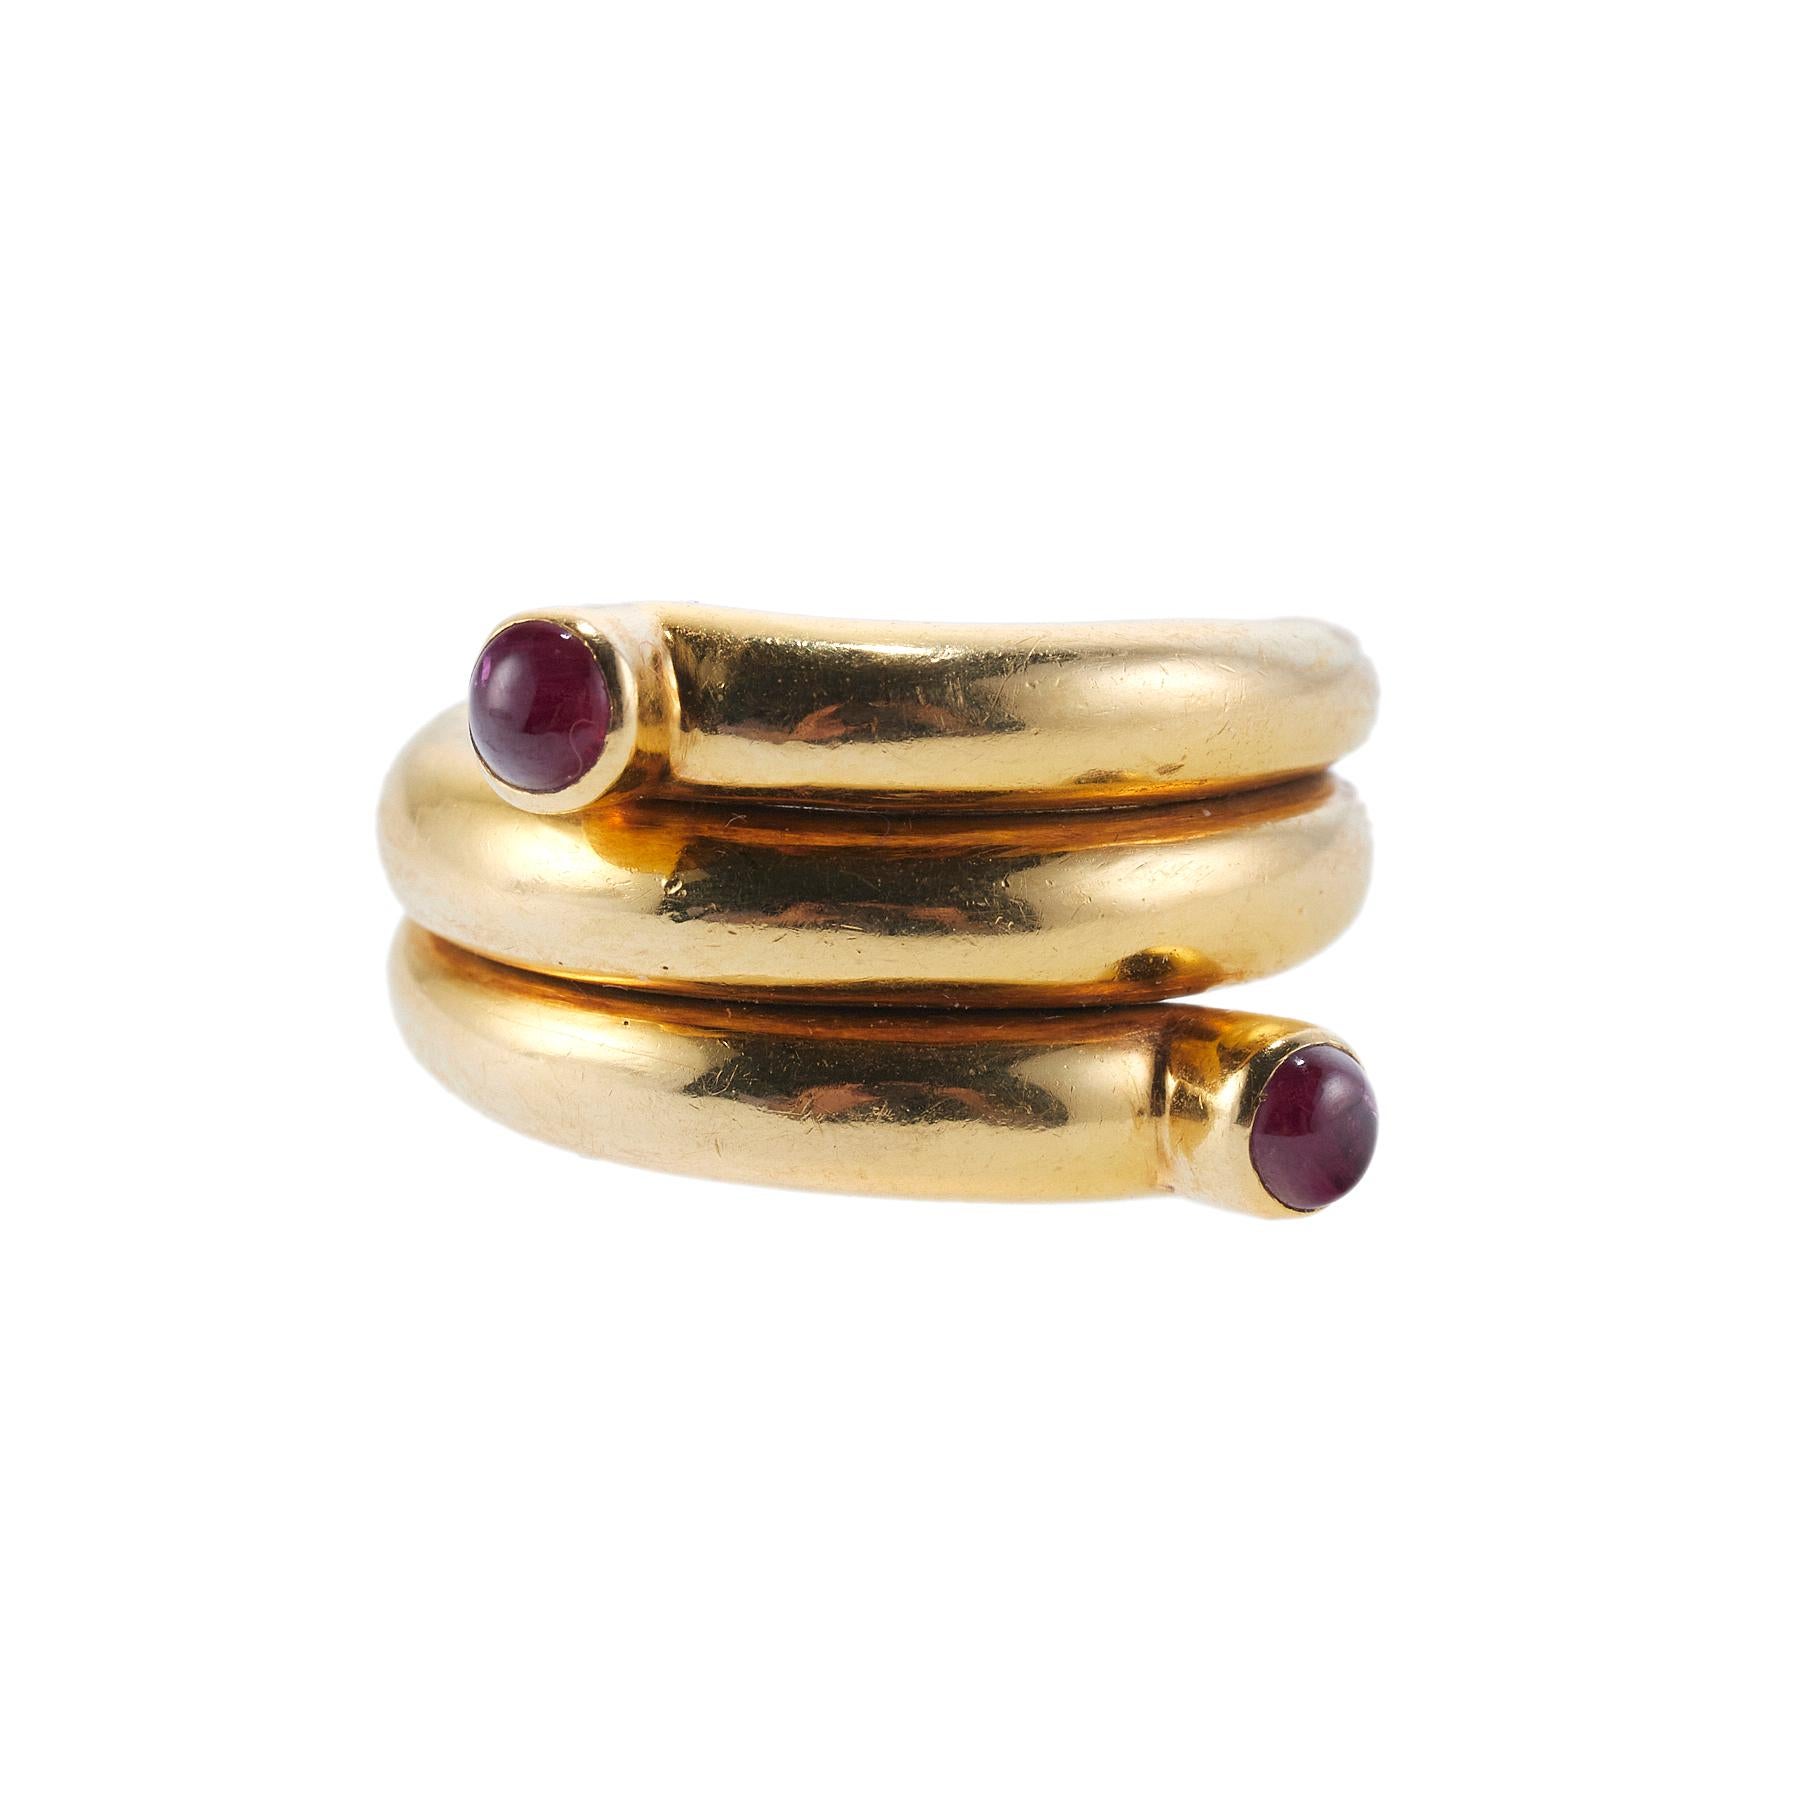 18k gold wrap ring by Jean Schlumberger for Tiffany & Co, with two rubies. Ring size 6 and it measures 13mm wide. Marked: Tiffany & Co, Schlumberger, 18k. Weight is 26.2 grams.